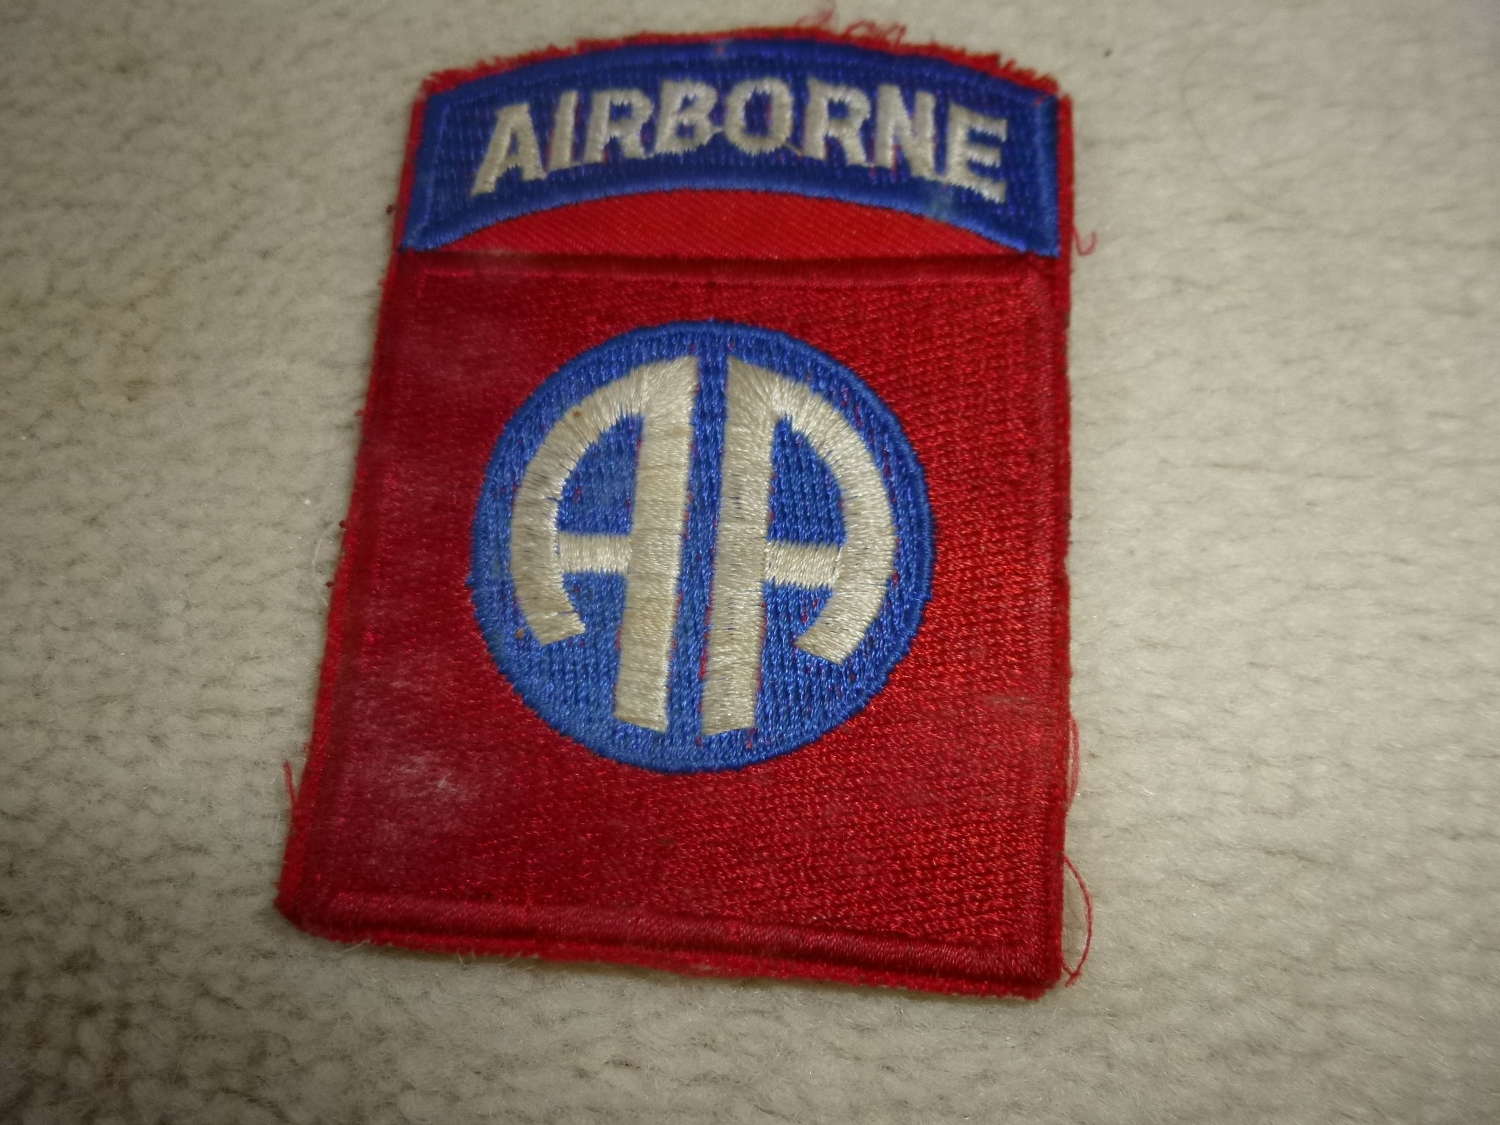 US Army 82nd Airborne Division patch